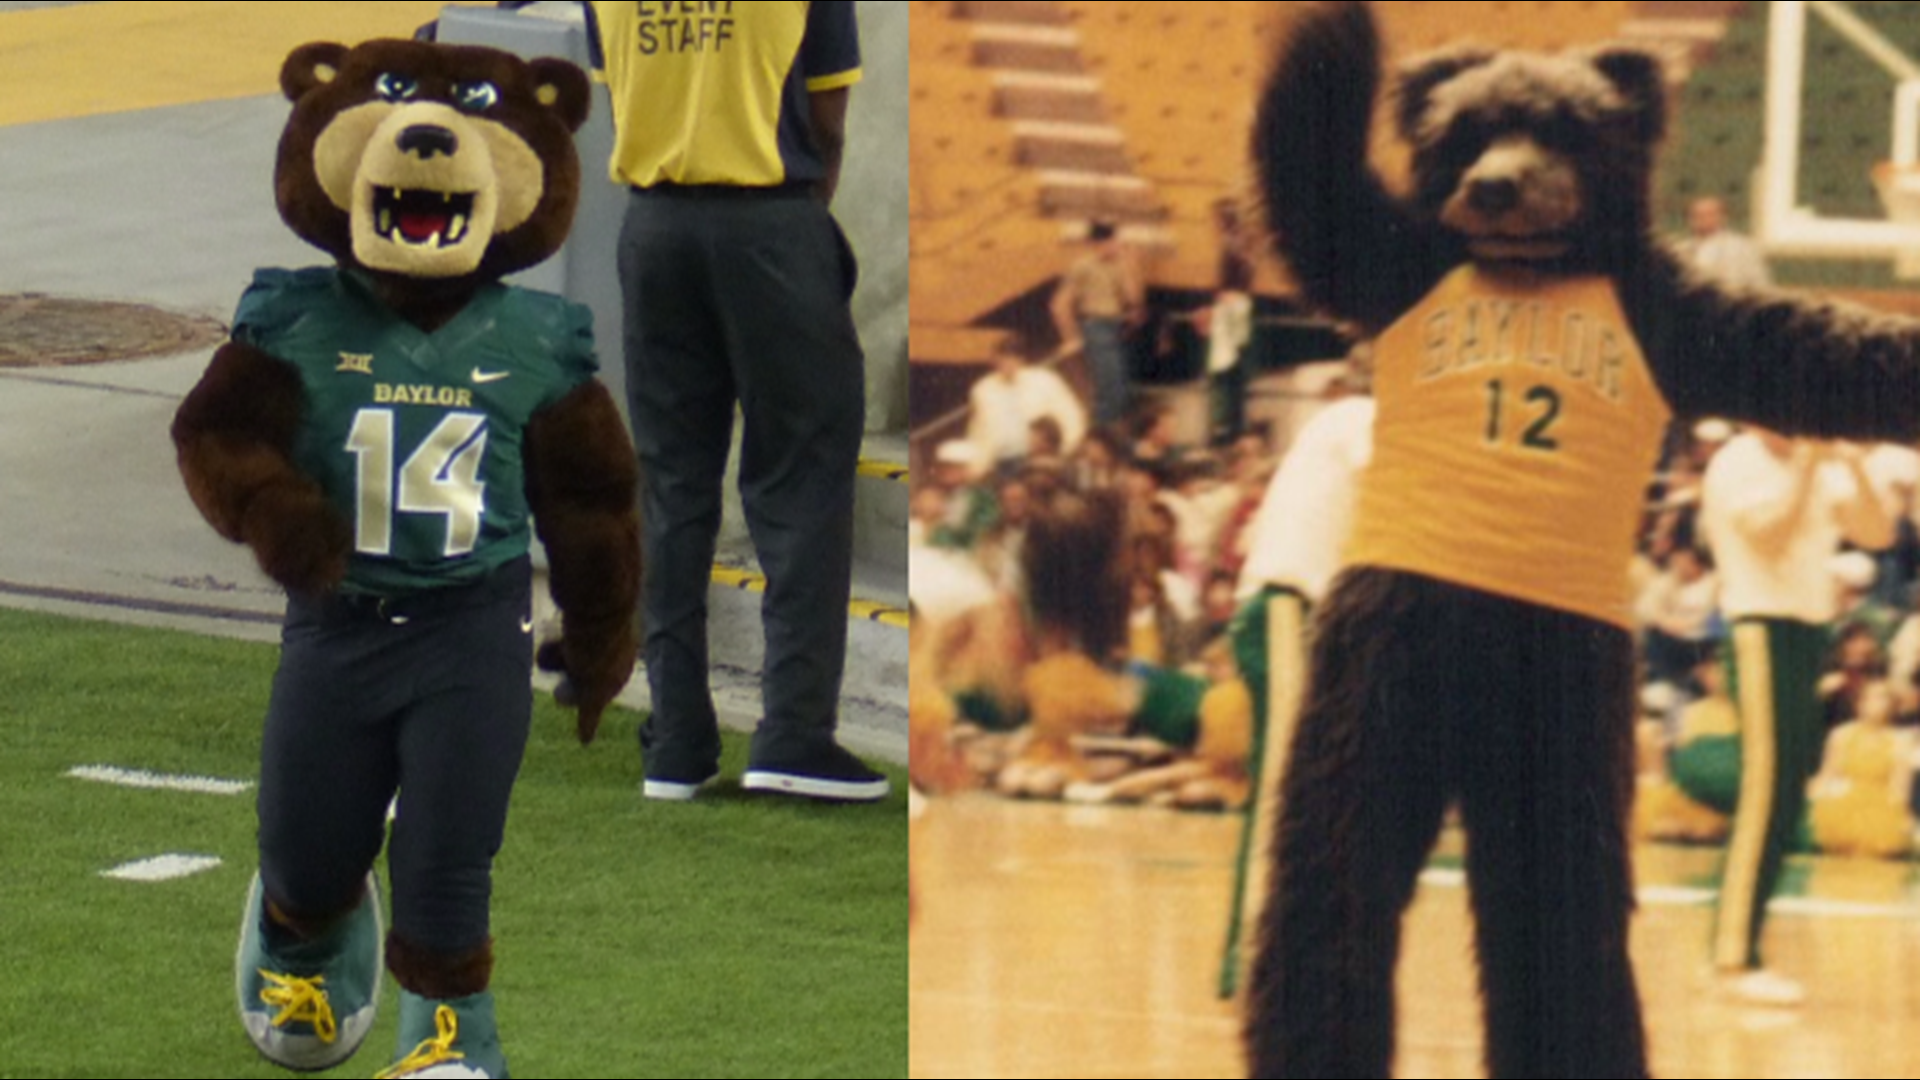 Andy Spencer and his daughter, Deanna, played a pivotal role in creating Bruiser and Marigold. The two mascots that represent Baylor University.